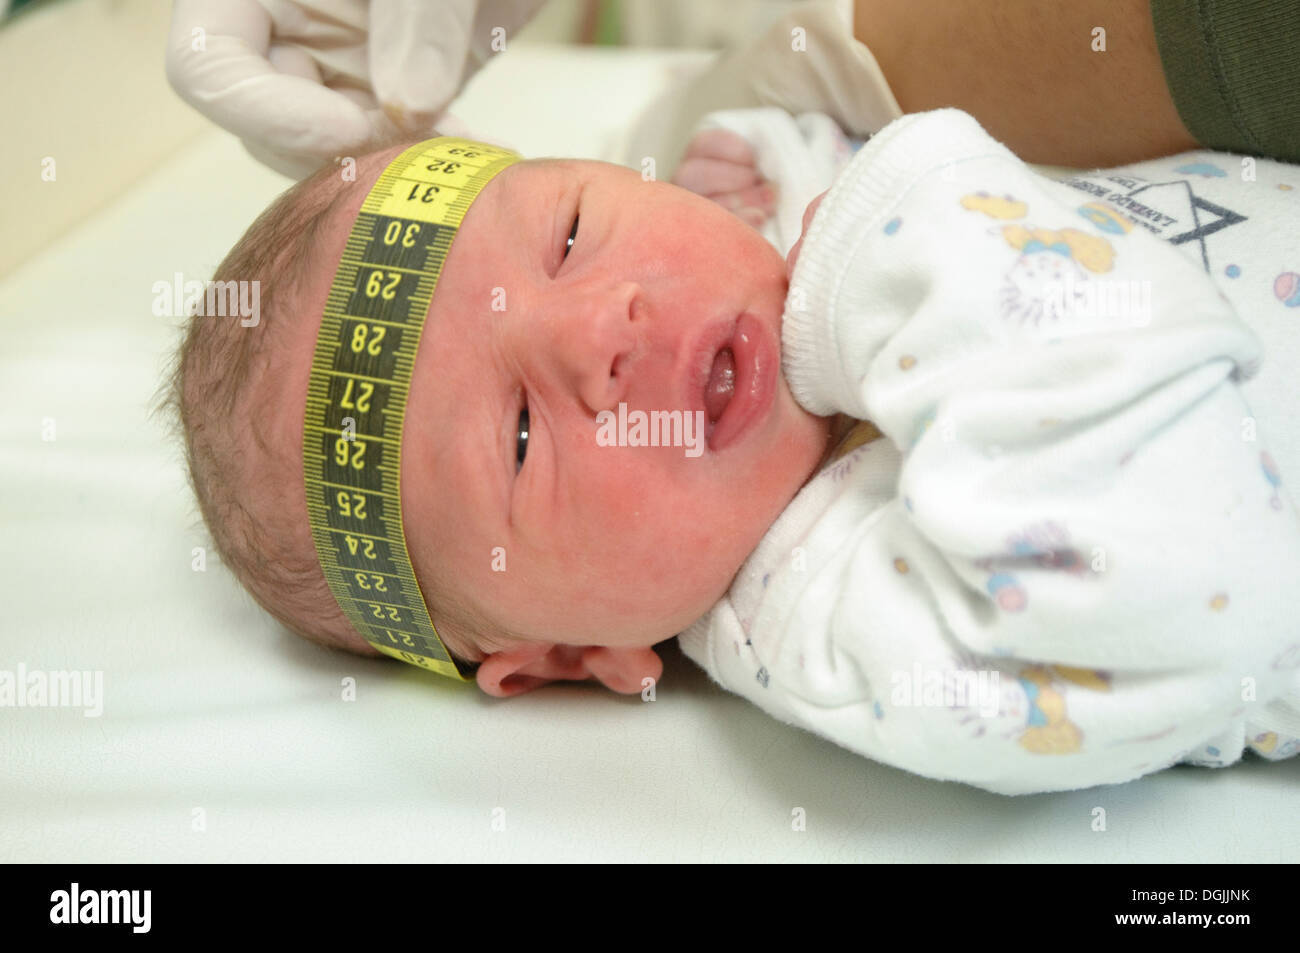 The head of a one day old baby boy is being measured with a tape measure - model release available Stock Photo